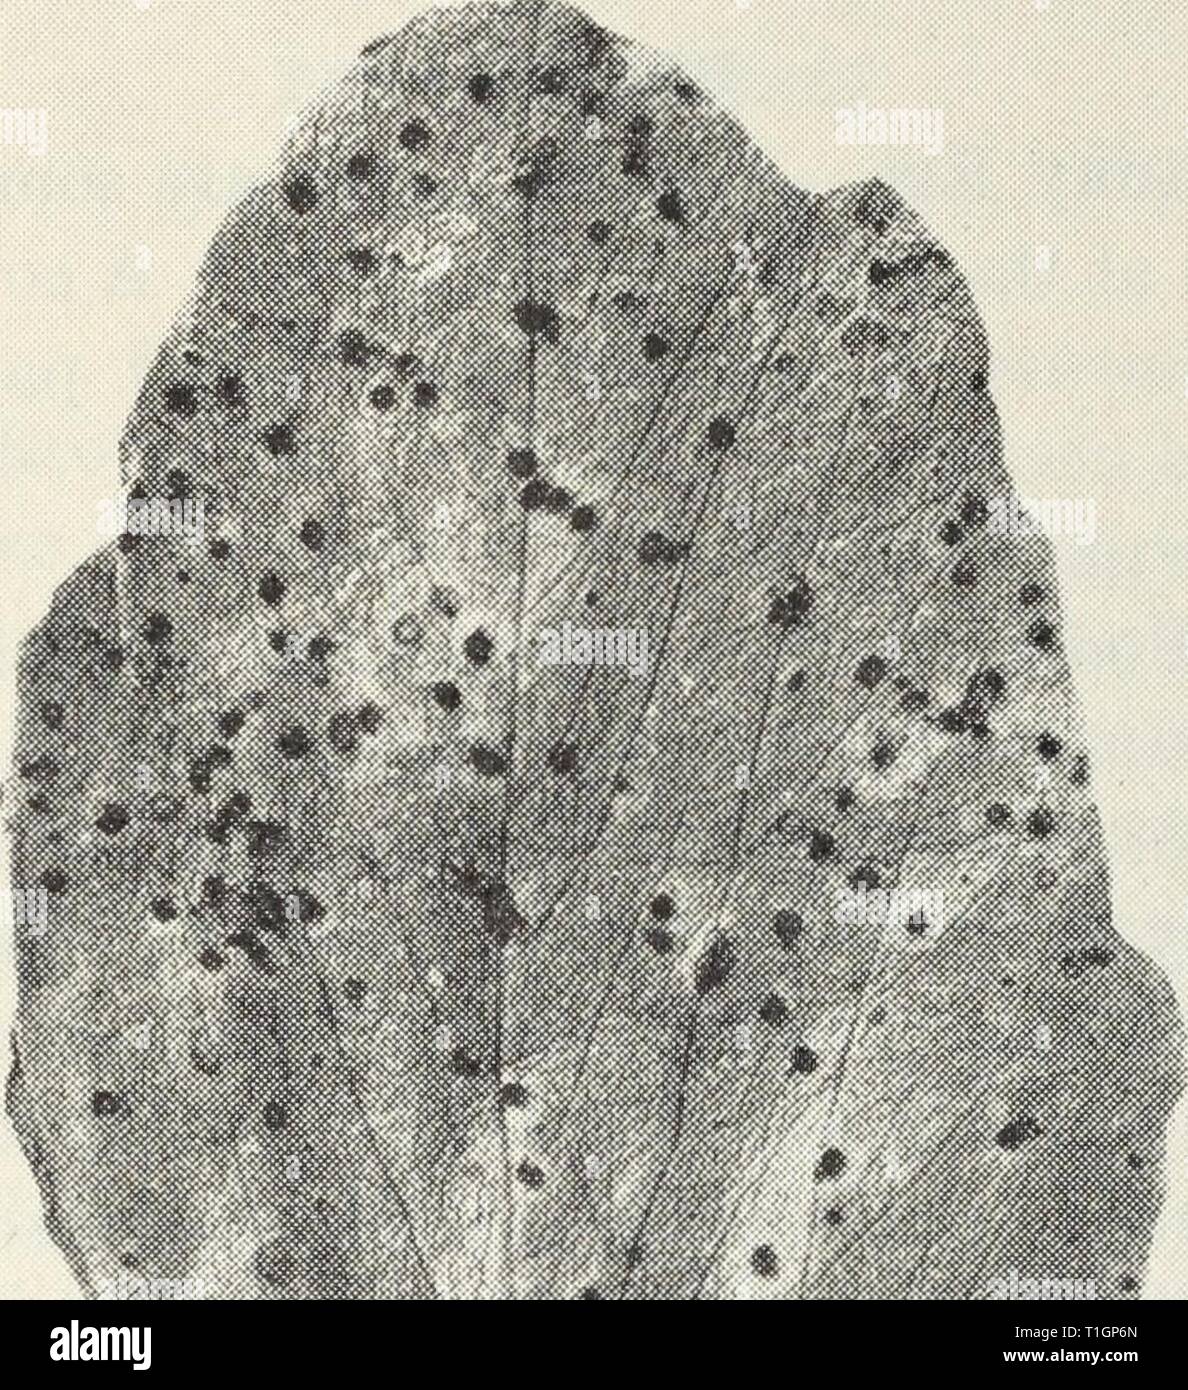 Diseases of truck crops  Diseases of truck crops / Ralph E. Smith  diseasesoftruckc119smit Year: 1940  Diseases of Truck Crops 63 true rust, and breaks out in small, red, spore pustules on the leaves and stems (fig. 30). It also attacks broad bean, but is not important. Septoria Leaf Spot, Leaf Blotch.—The affected leaves become spotted with indefinite, yellow to brown blotches and are blighted much as in ascochyta blight. Pods and seeds may become infected with this fungus Stock Photo